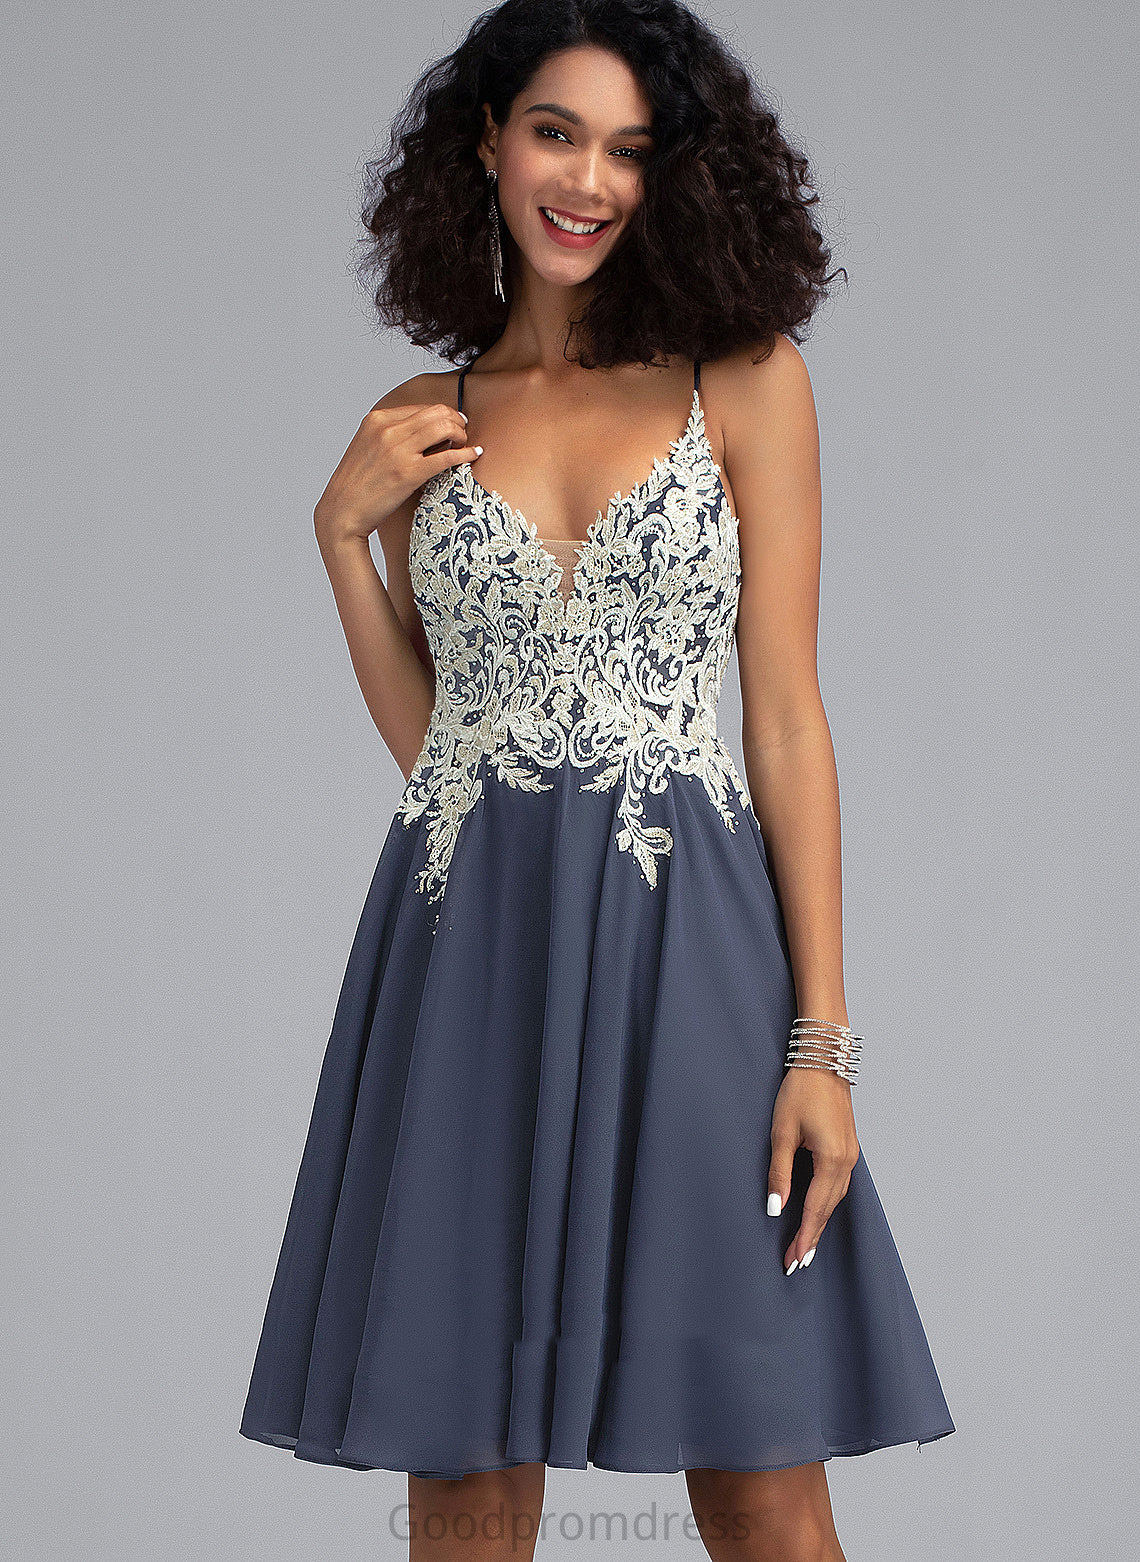 Chiffon Homecoming With V-neck Dress Homecoming Dresses Short/Mini Sequins Beading Hayden A-Line Lace